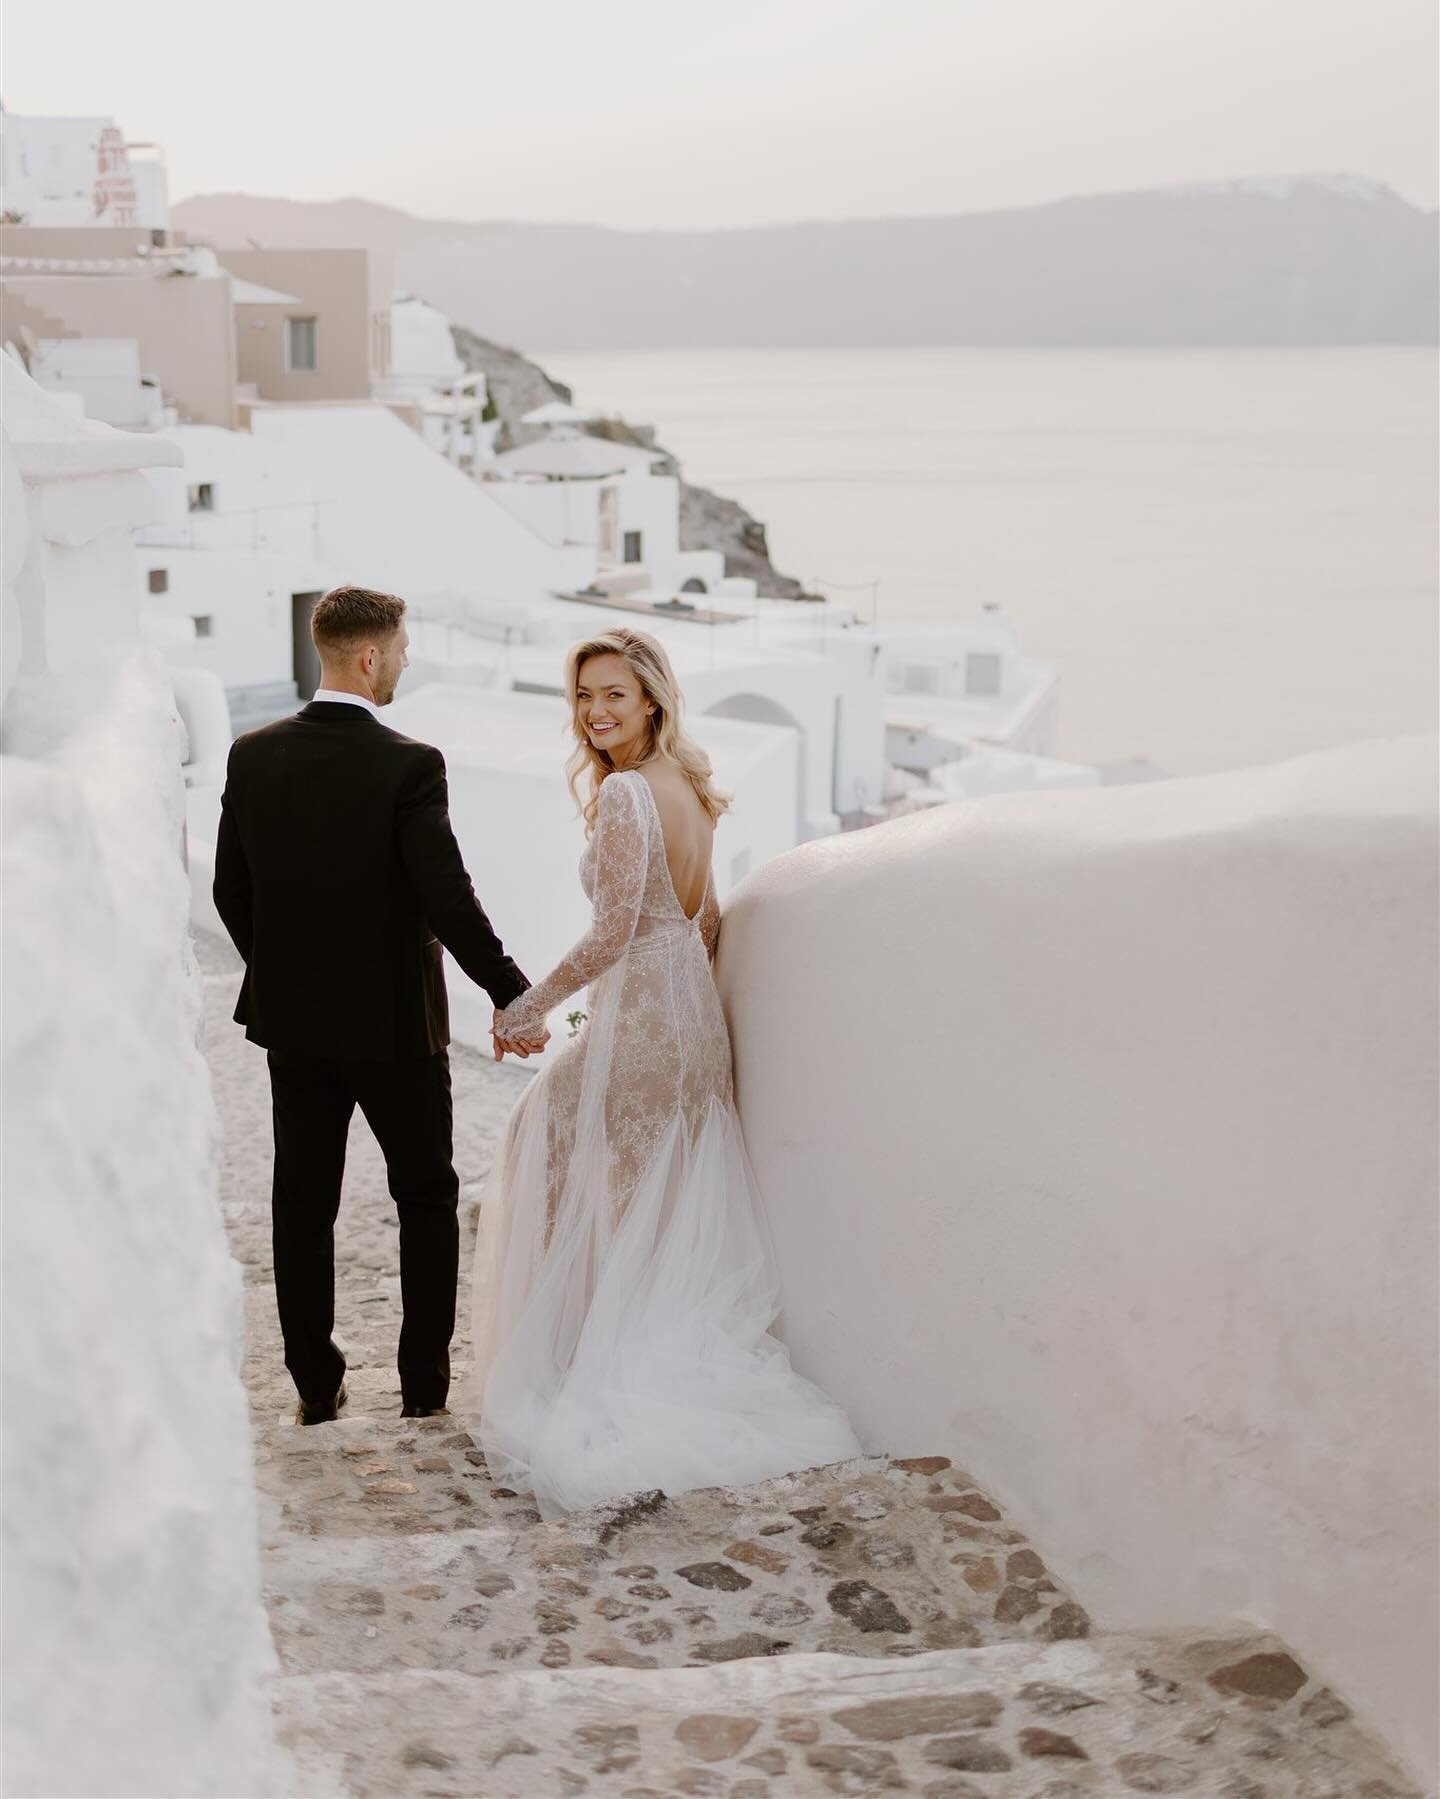 Sunrise moments 🤍

A sunrise session in Santorini is a must. It allows you to experience the city calmly, without the usual crowds, making it perfect for taking photos with minimal disturbances, but most importantly, you can enjoy the sunrise togeth